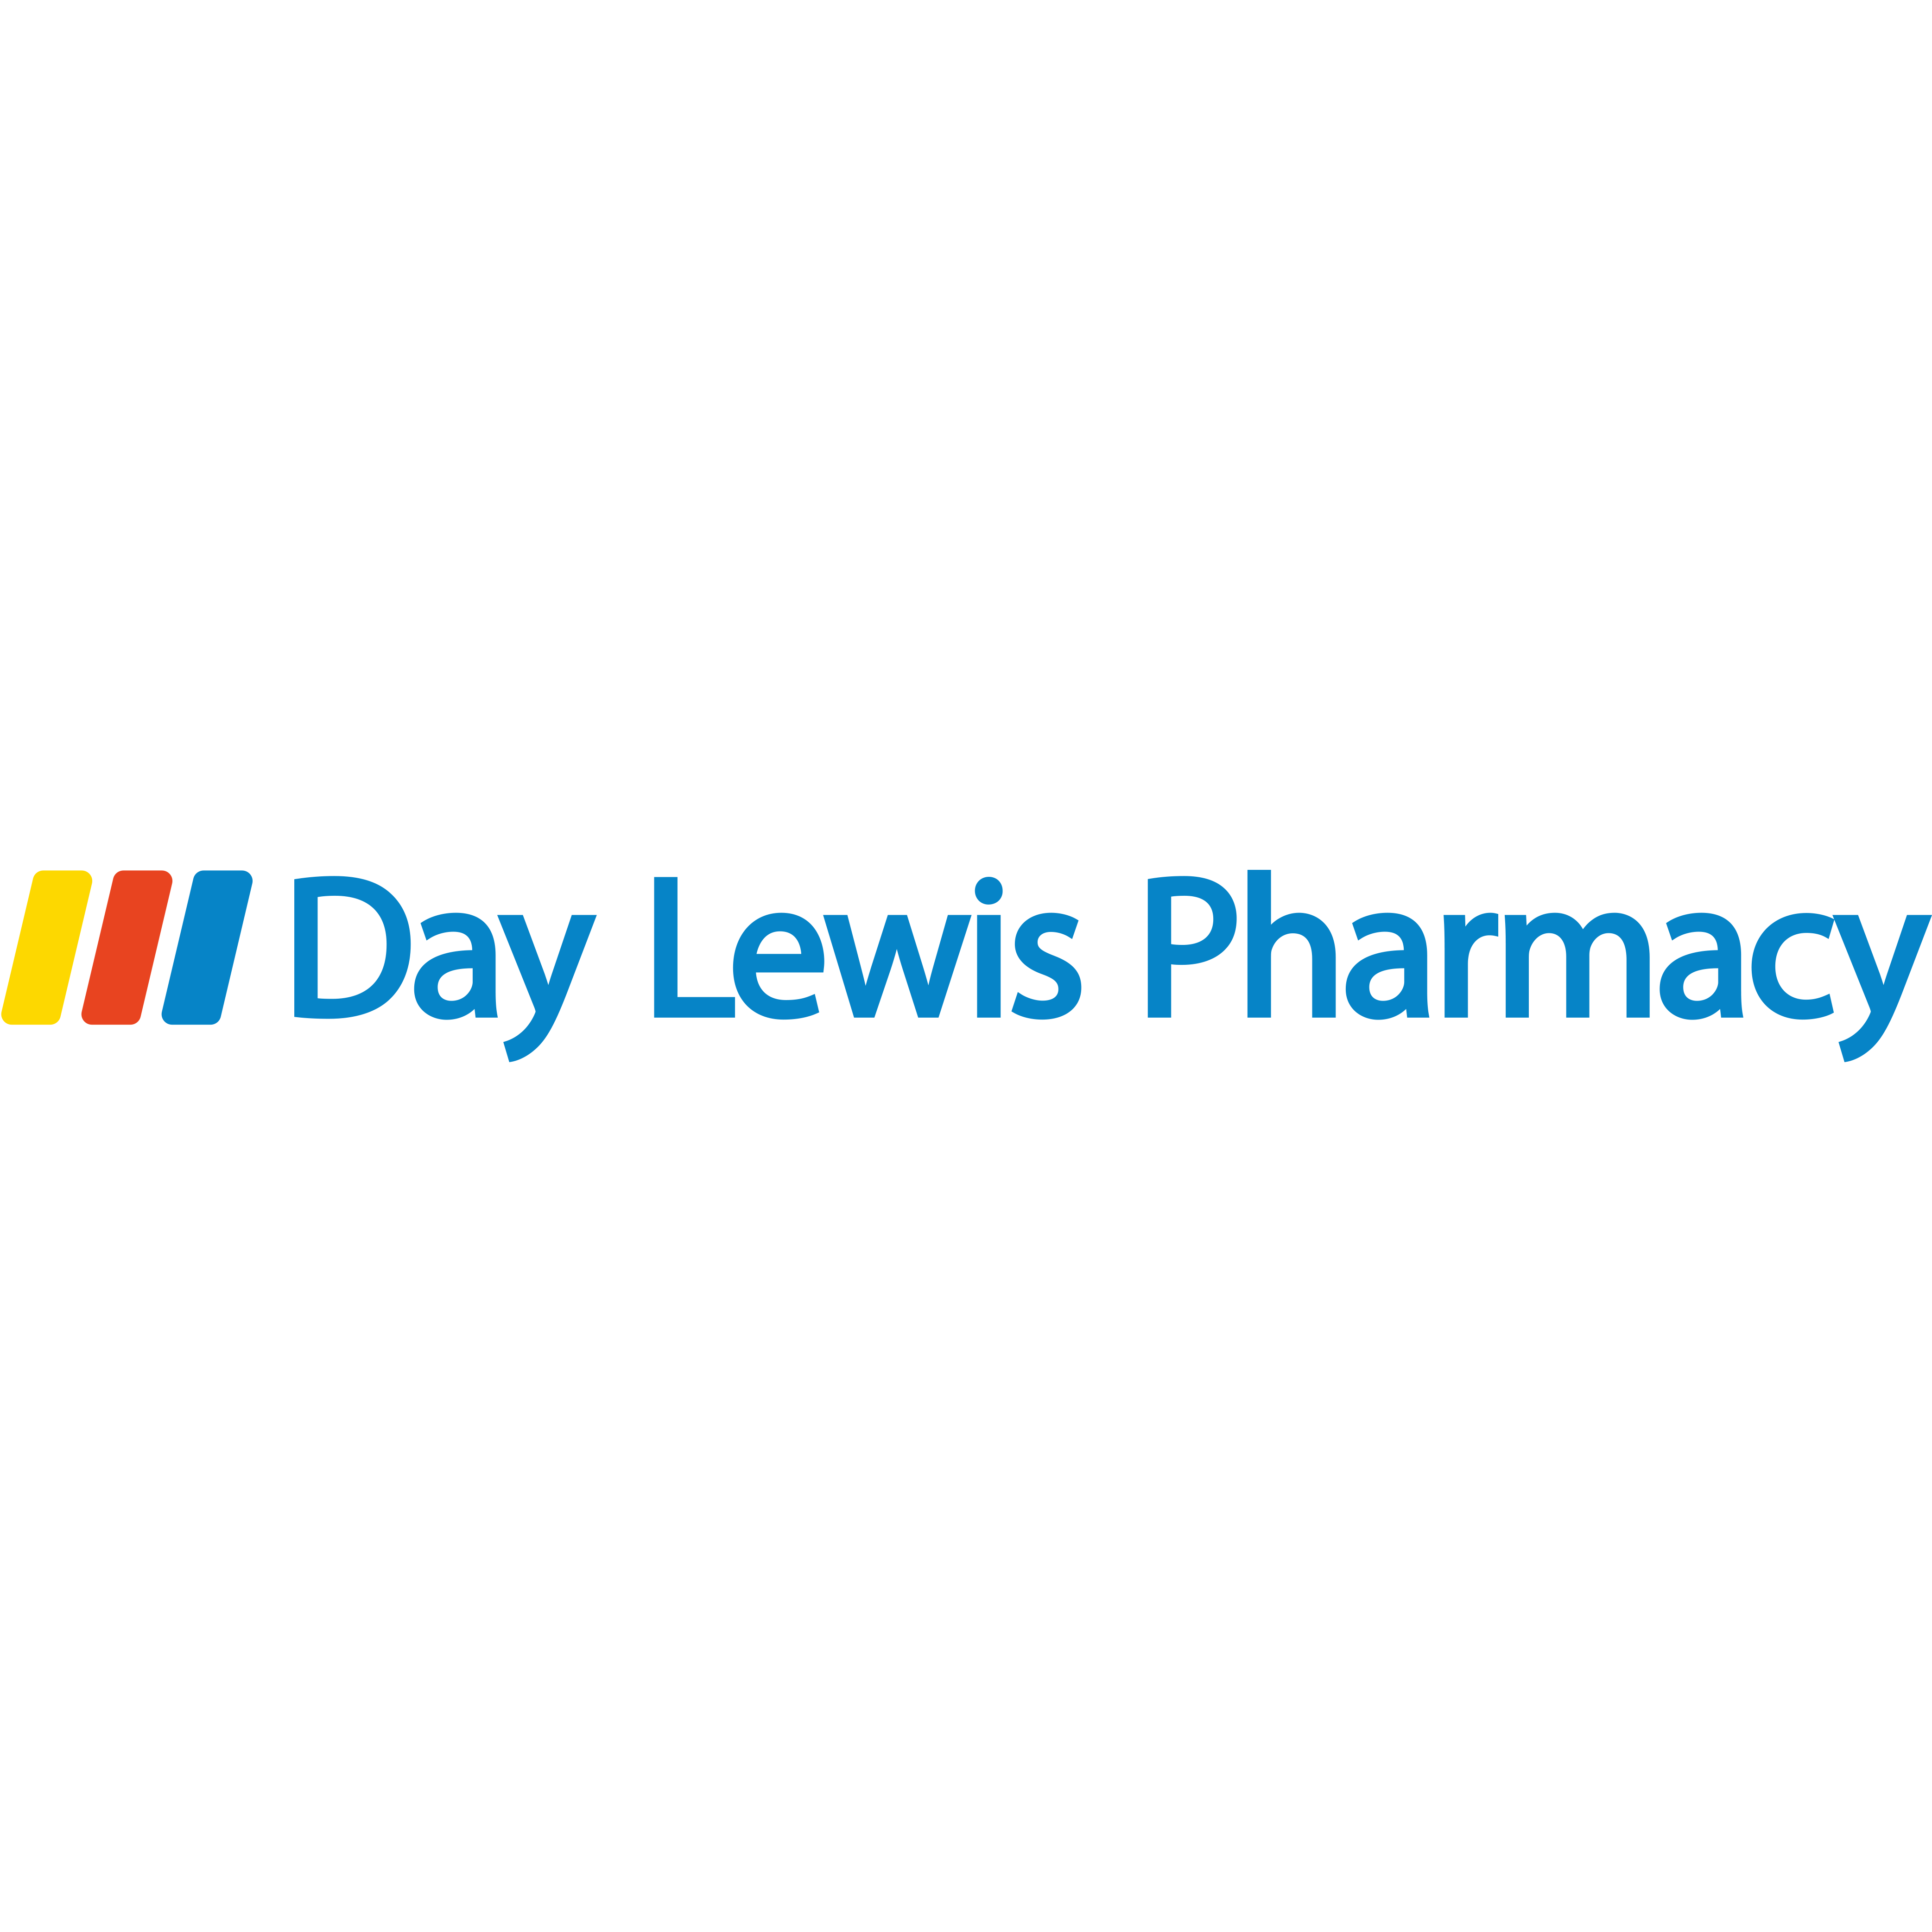 Day Lewis Pharmacy Redruth - Redruth, Cornwall TR15 2DB - 01209 211056 | ShowMeLocal.com